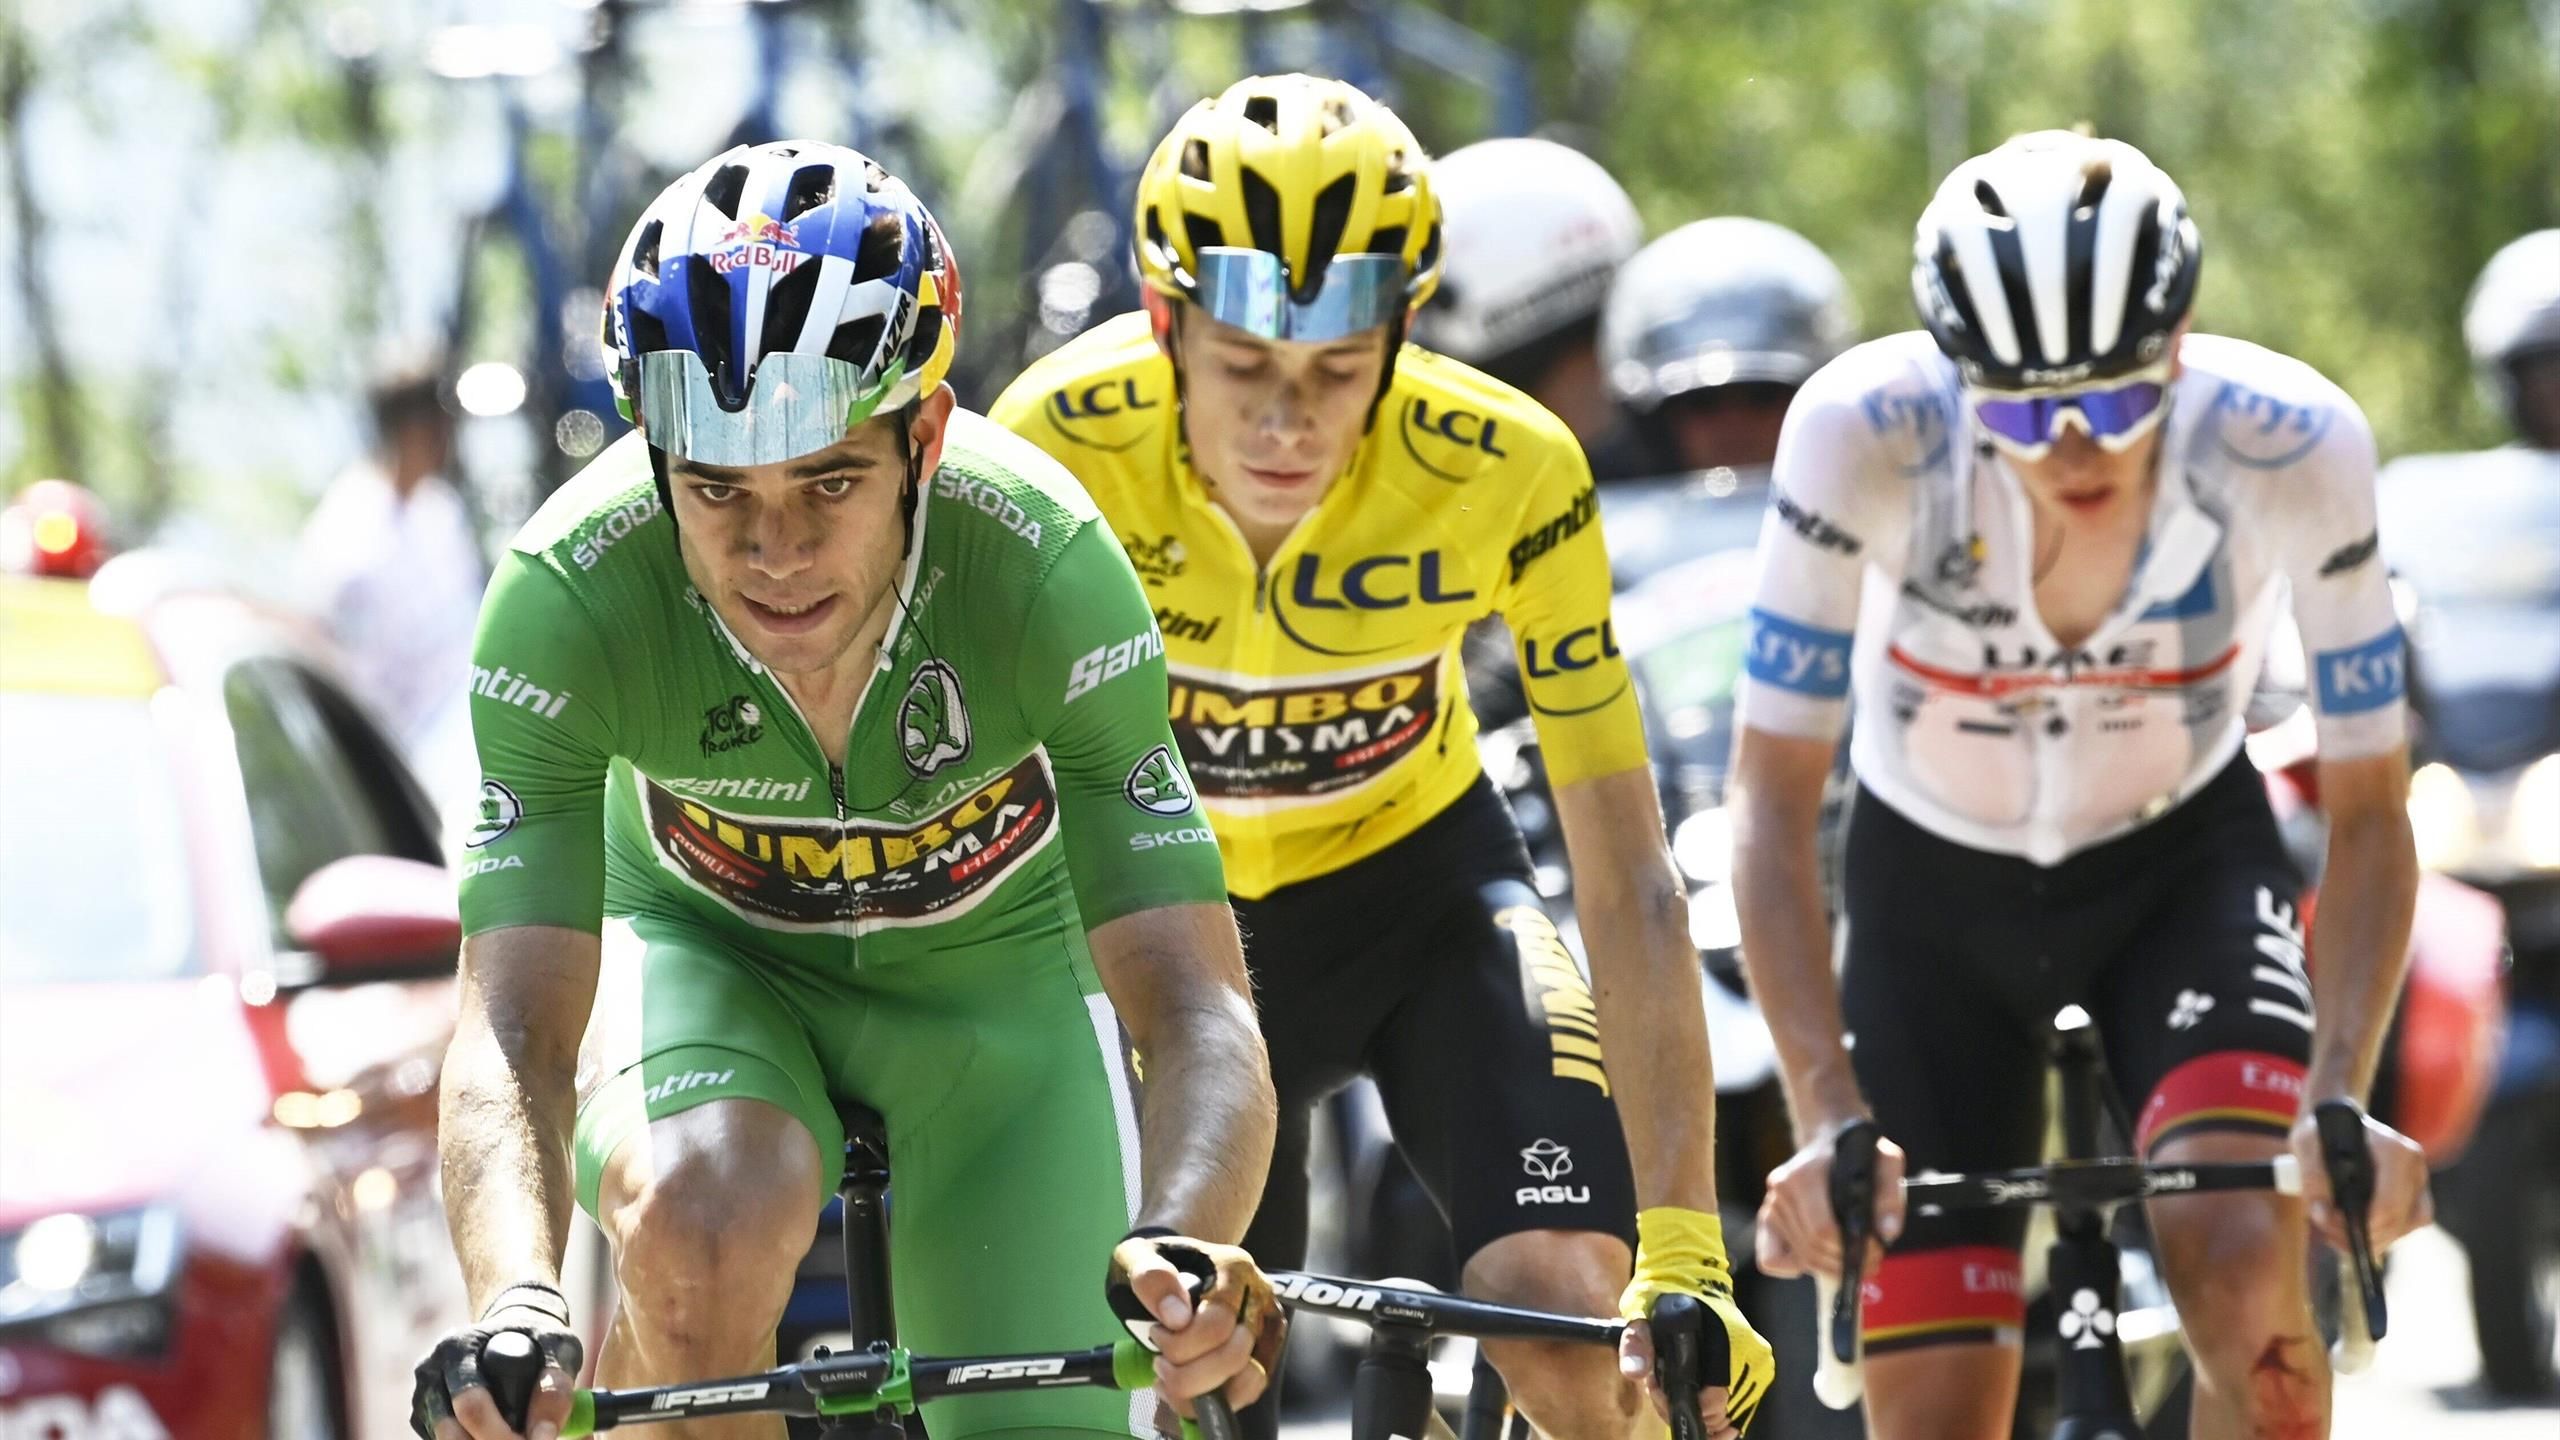 Tour de France standings and results - GC, points jersey